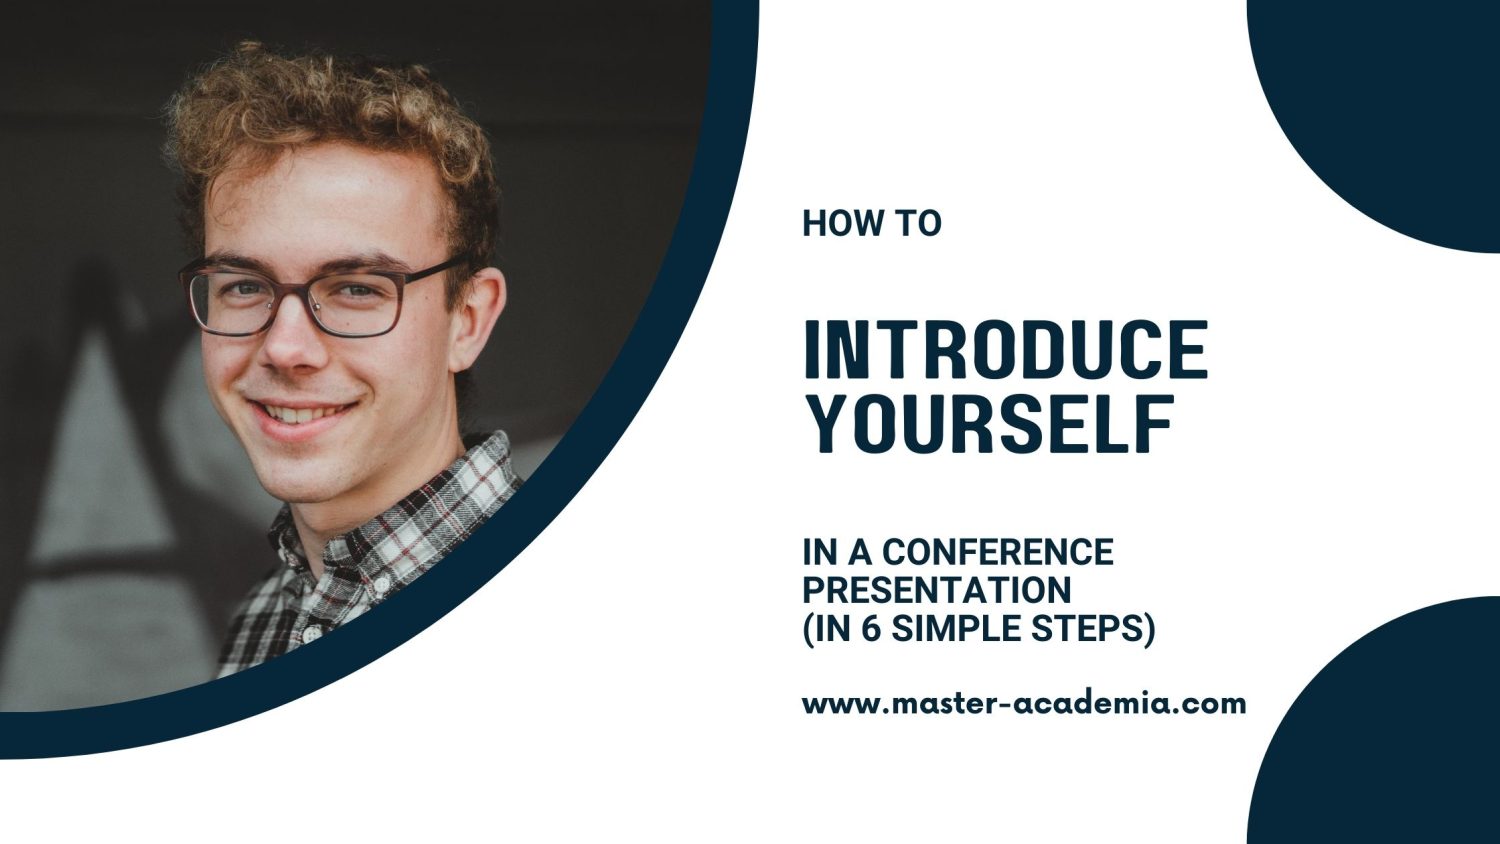 how to introduce yourself in a presentation reddit